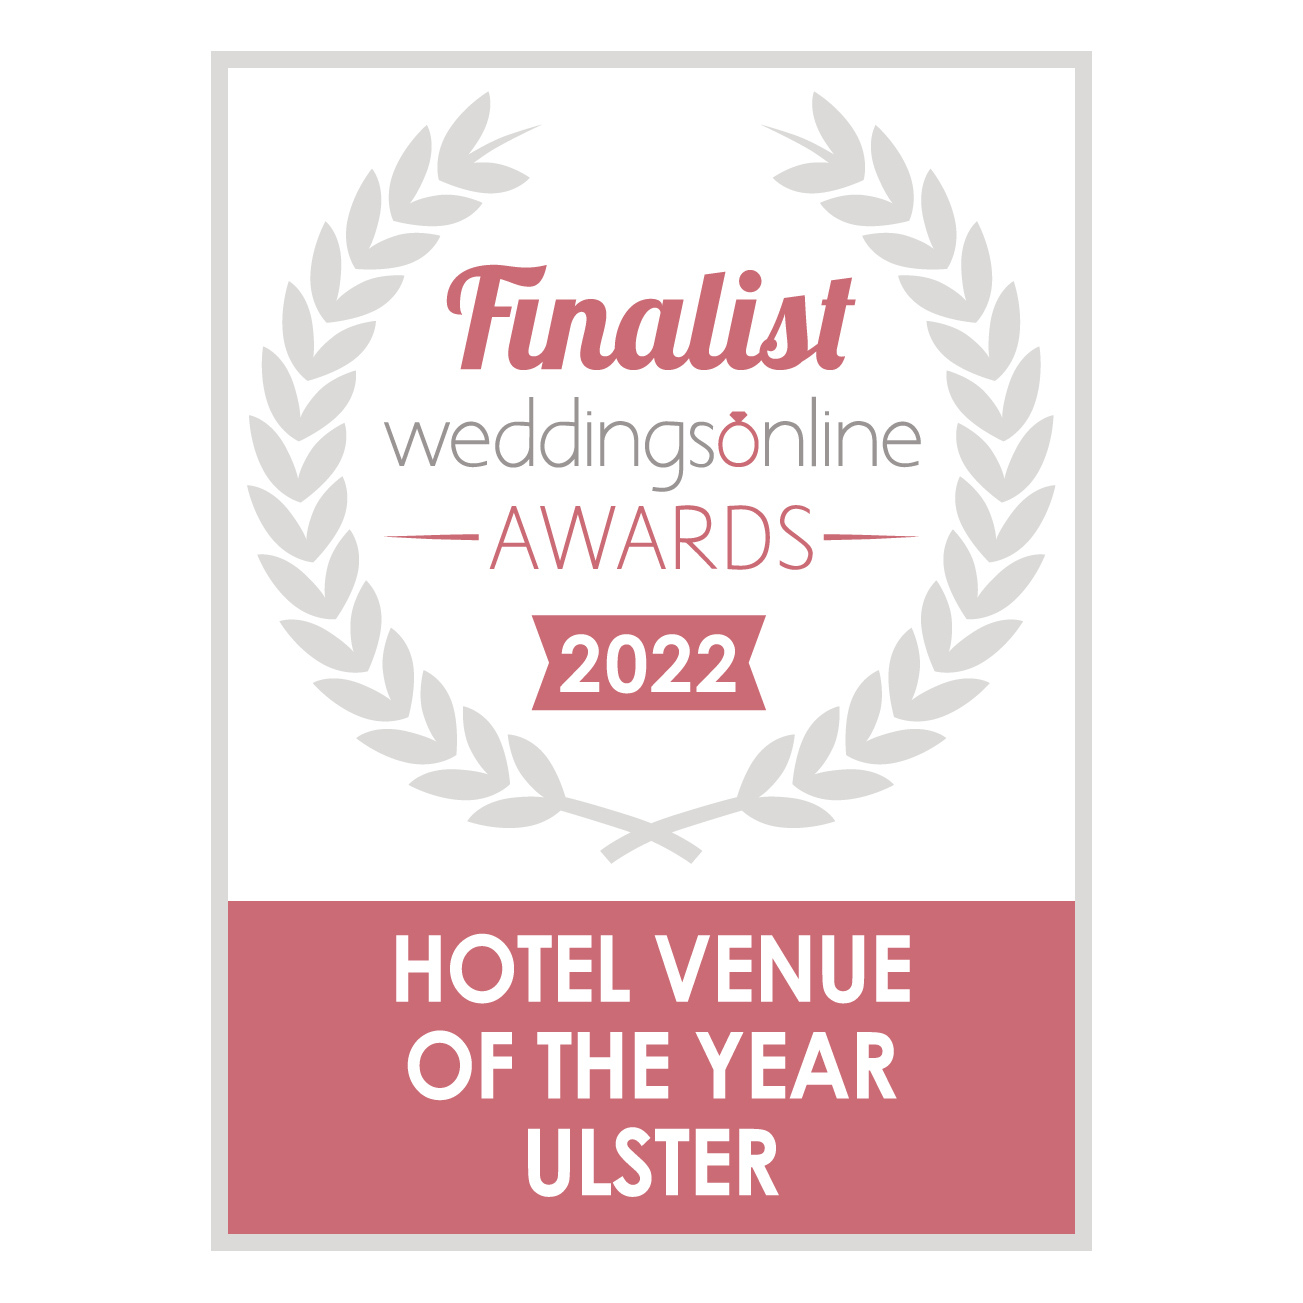 WO Hotel Venue of the Year - Ulster, finalist